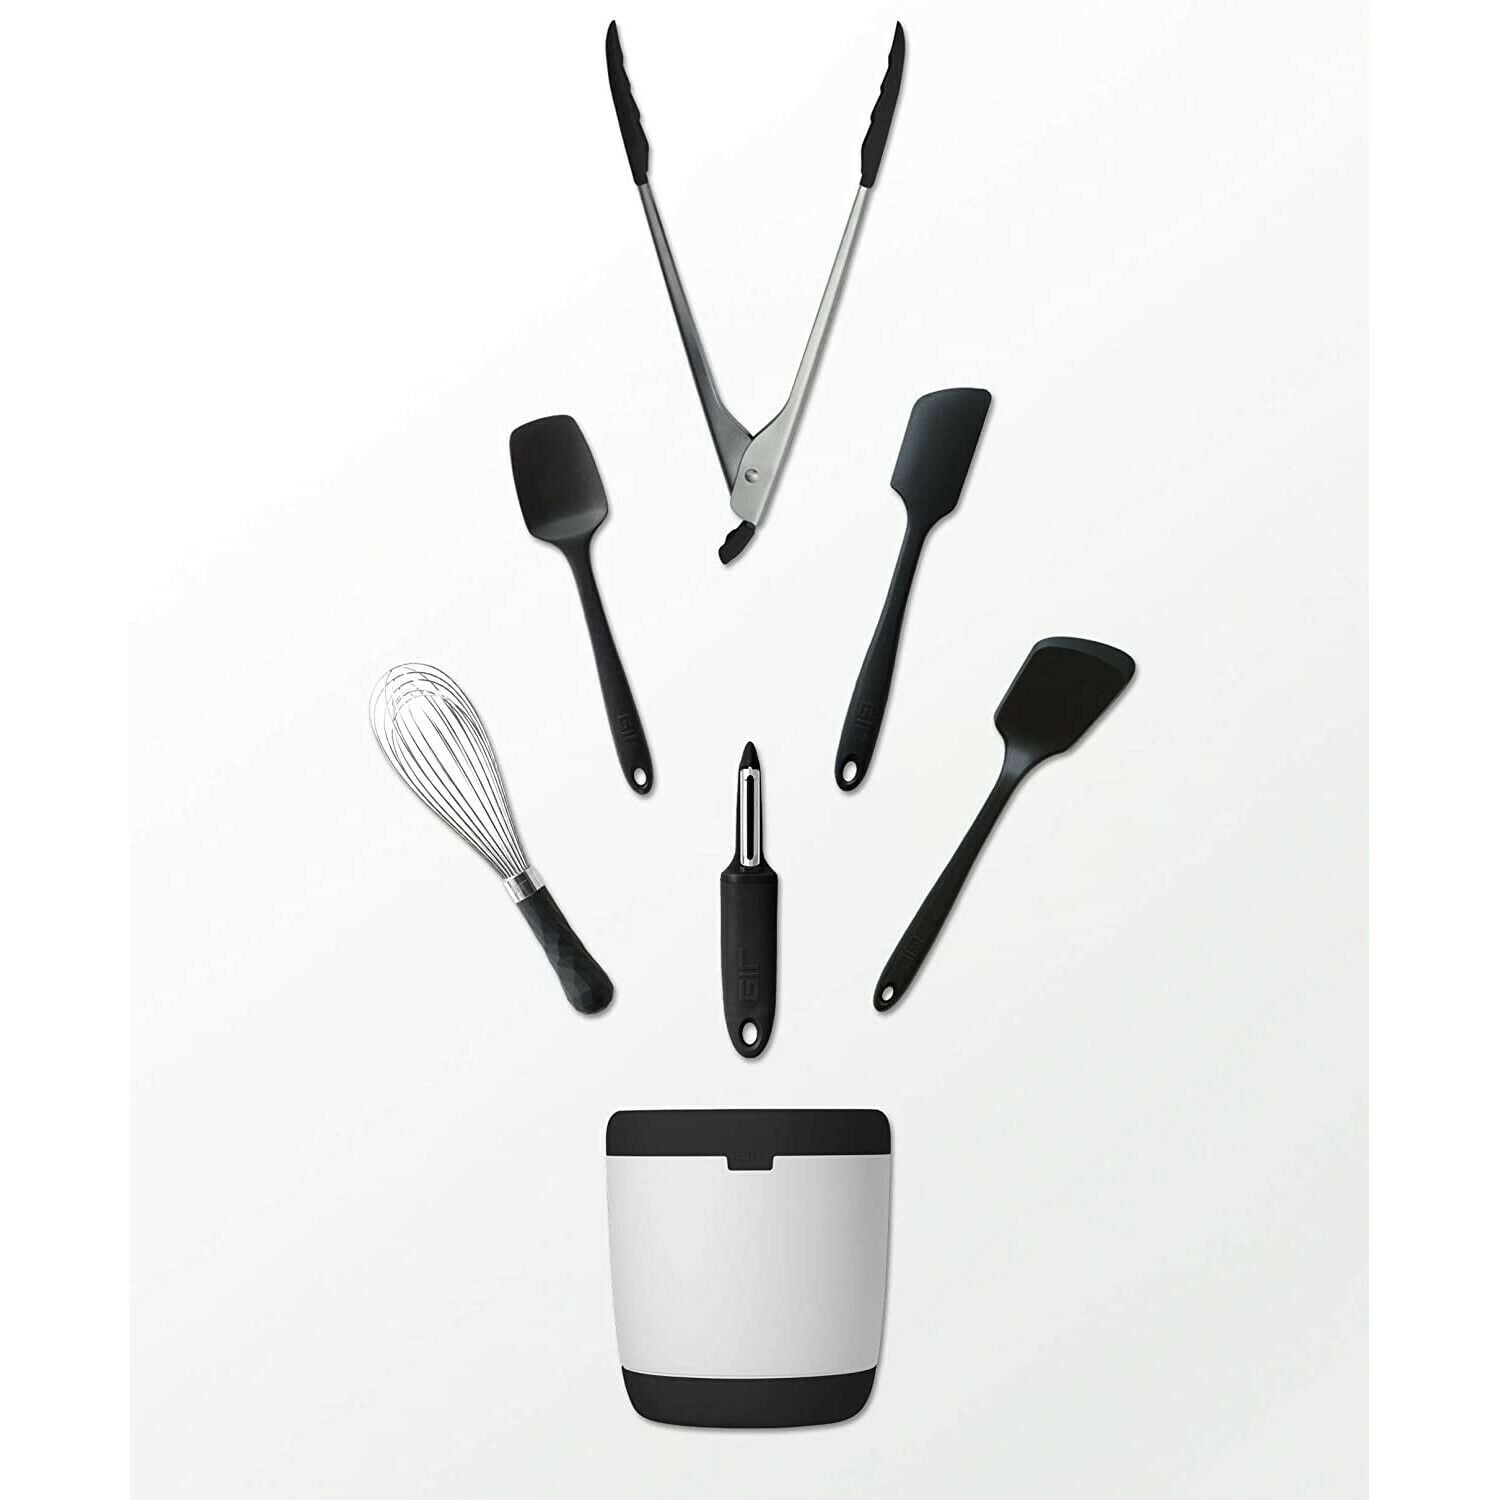 GIR 7-Piece Ultimate Kitchen Tool Set, Silicone